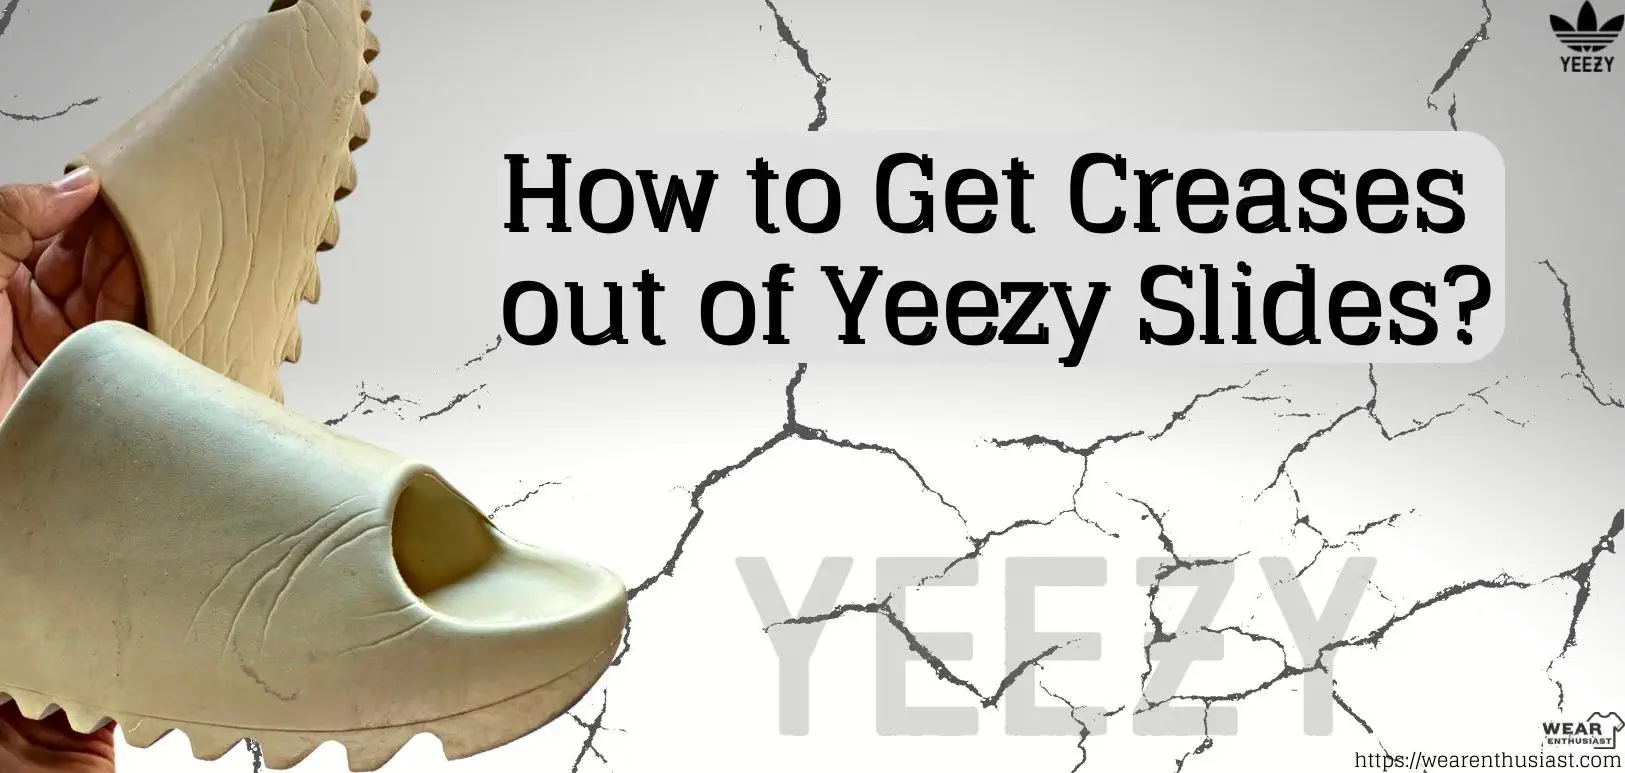 How to Get Creases out of Yeezy Slides?